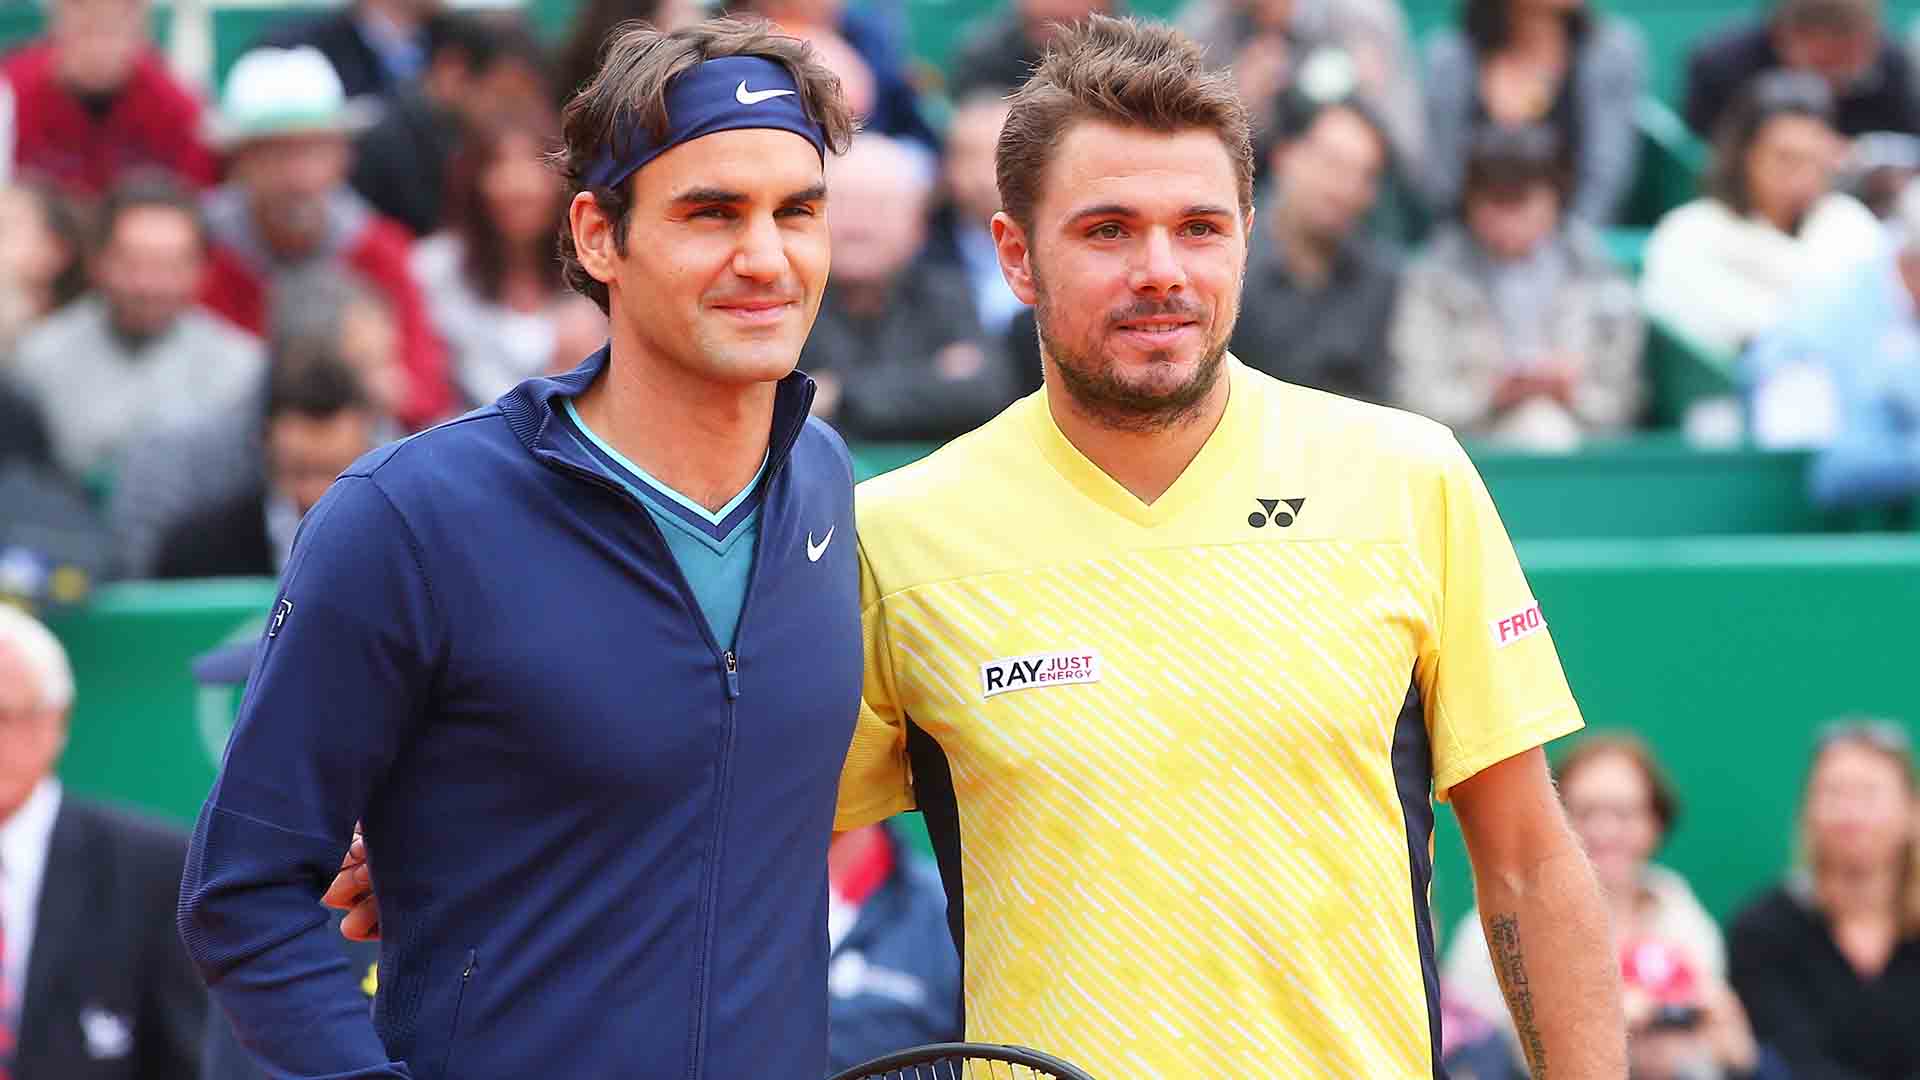 Roger Federer entered the 2014 Rolex Monte-Carlo Masters final with a 13-1 ATP Head2Head record against Stan Wawrinka.